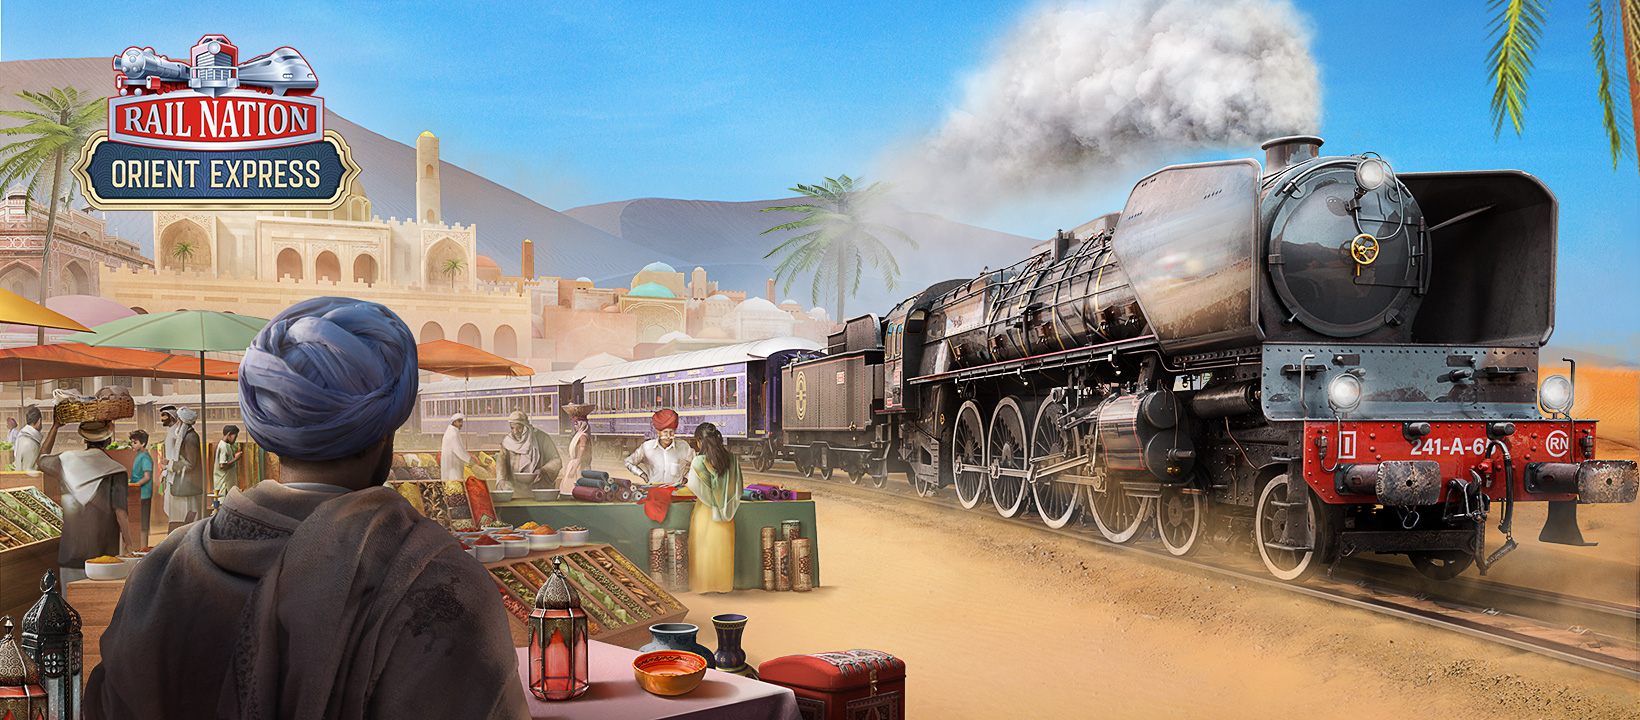 Orient Express - Launching Oct. 18th - Free browser-based online